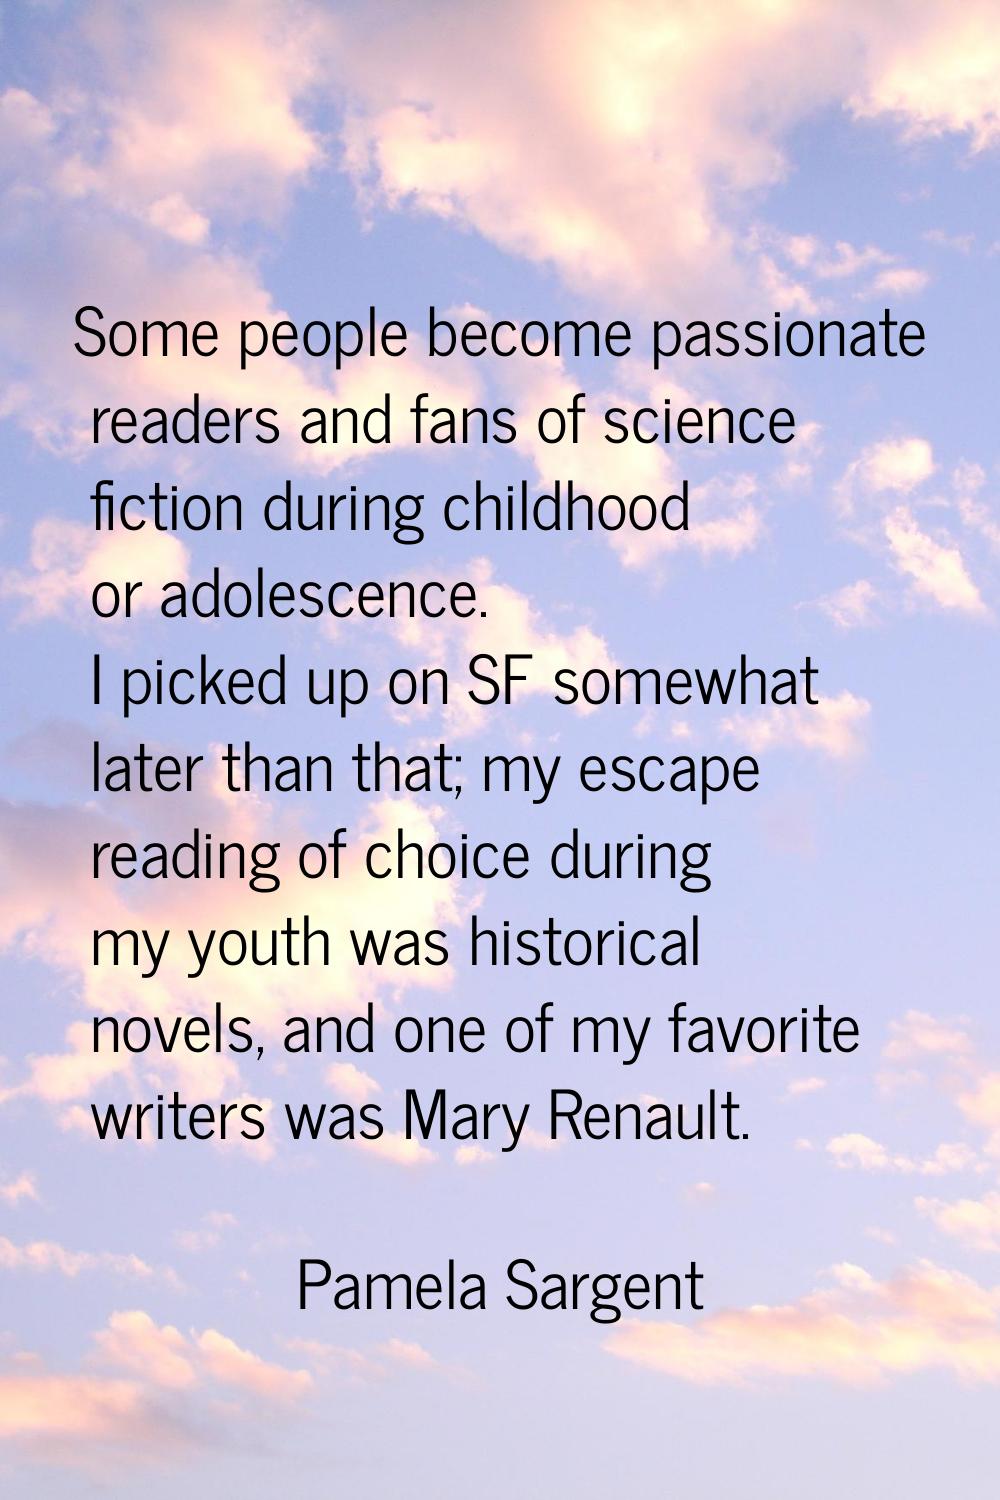 Some people become passionate readers and fans of science fiction during childhood or adolescence. 